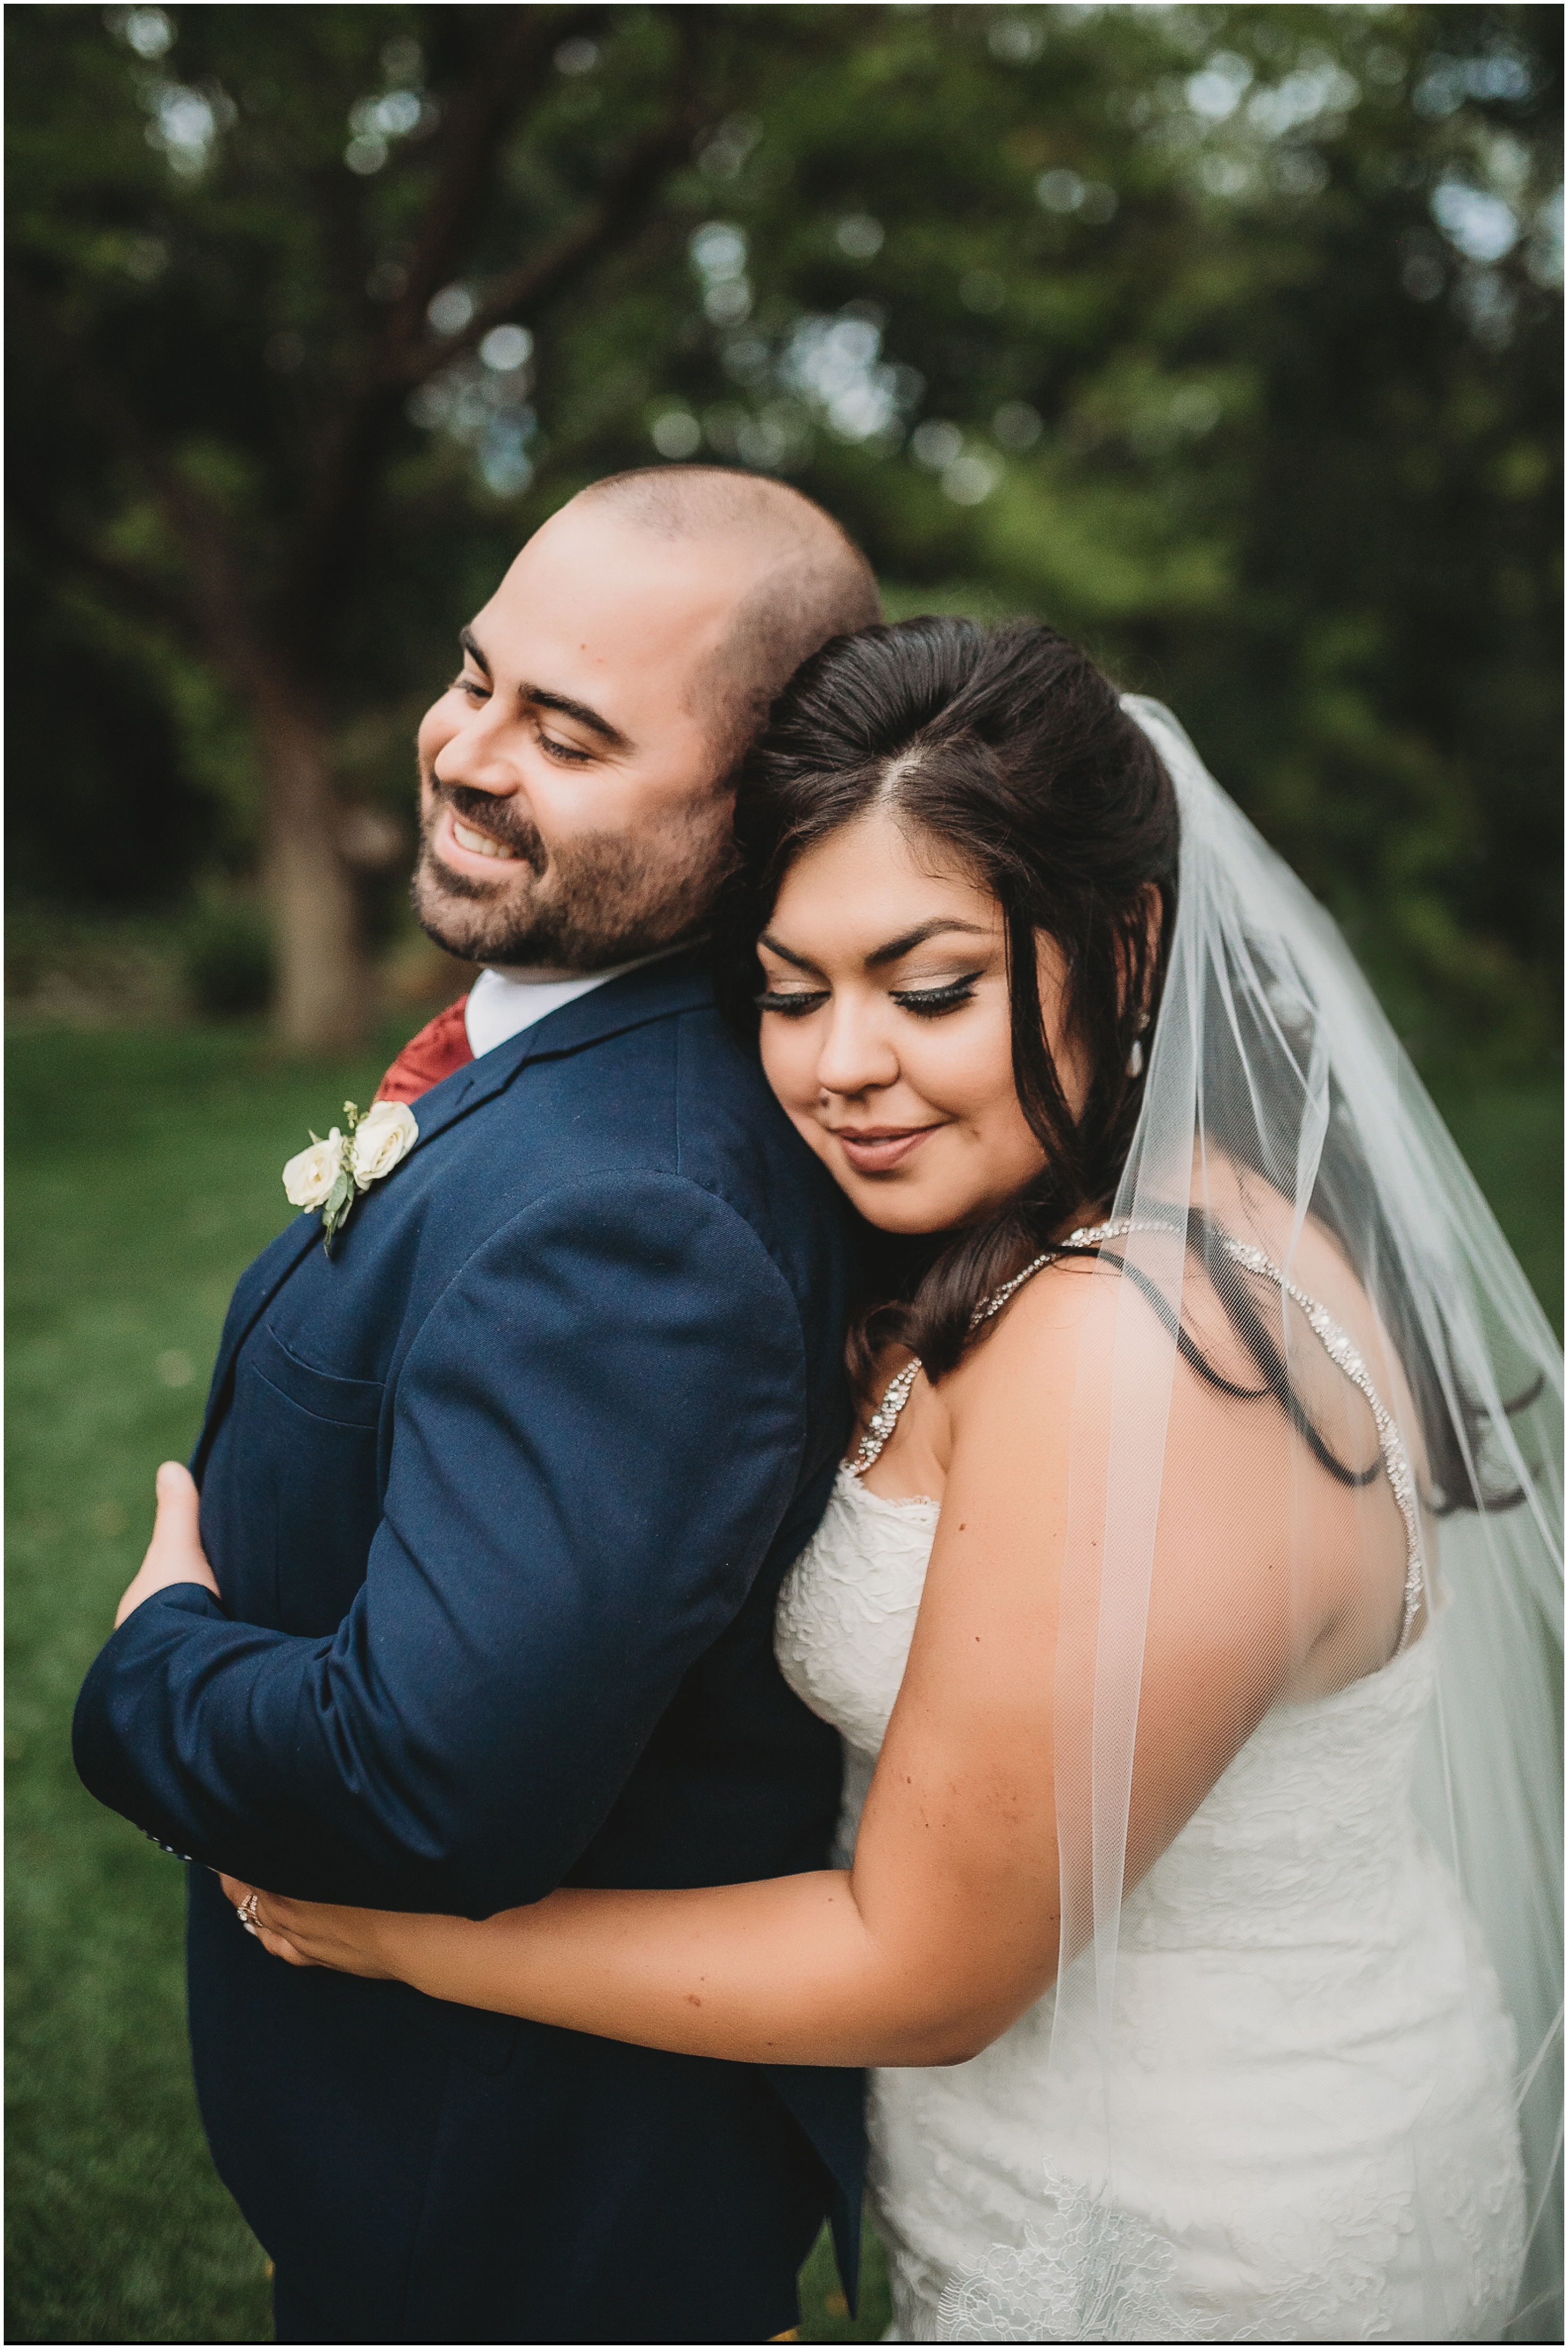 Bride and groom portraits at Garden chic inspired wedding at Willow Creek Ranch in Valley Center